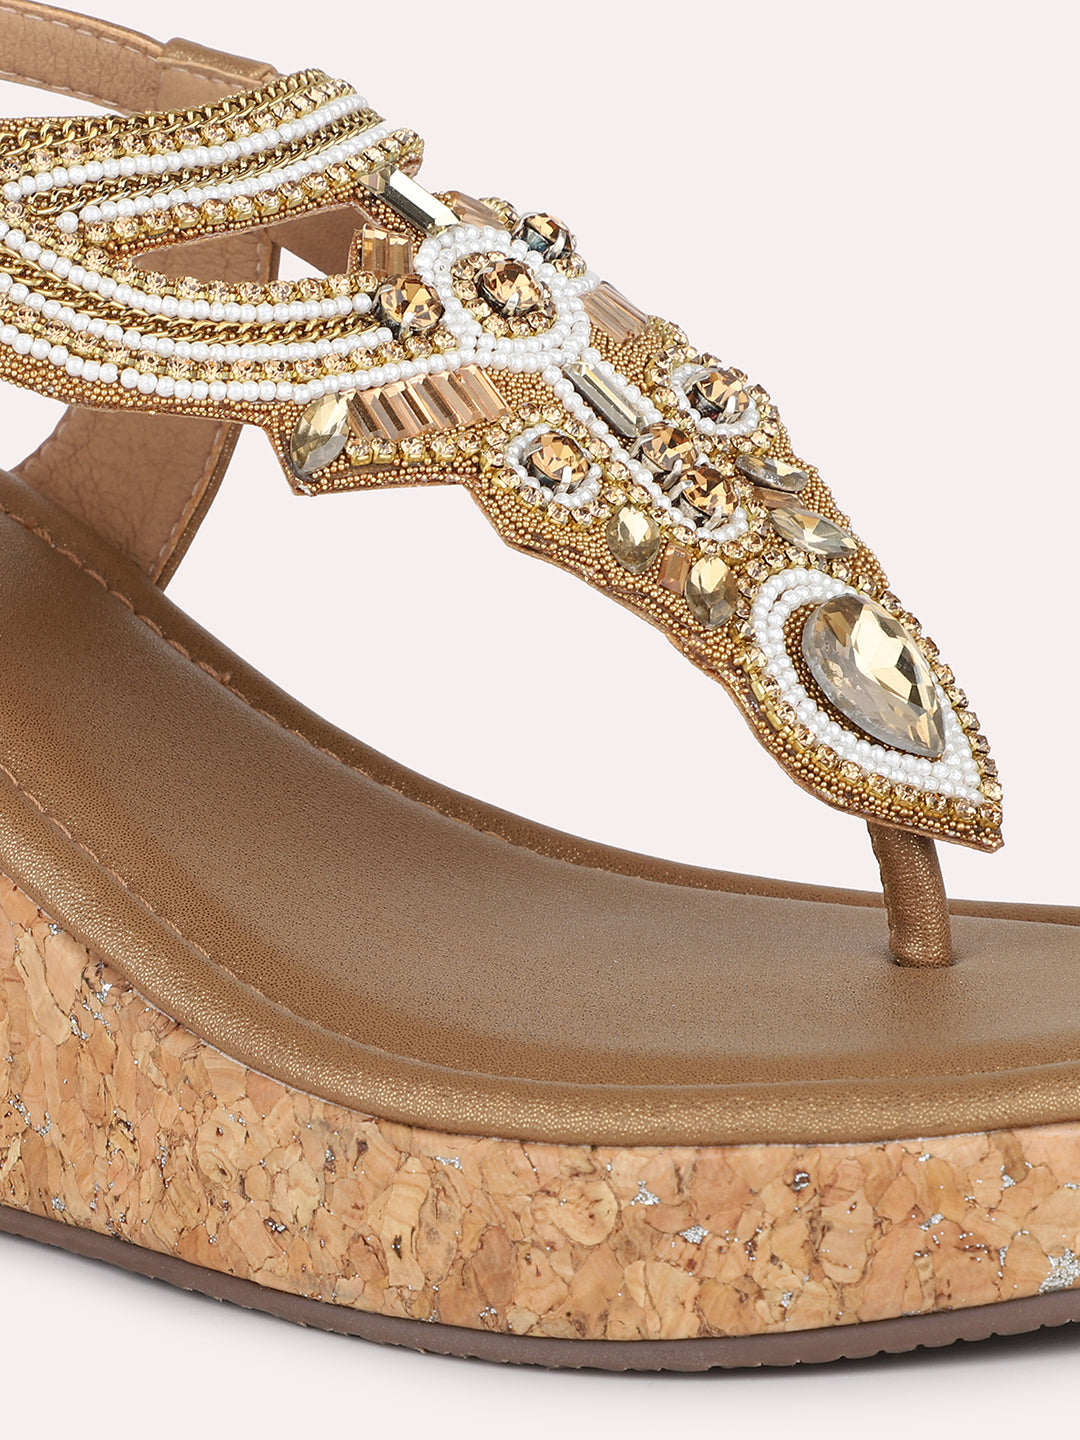 Women Antique Ethnic Embellished Wedges with Buckle Closure